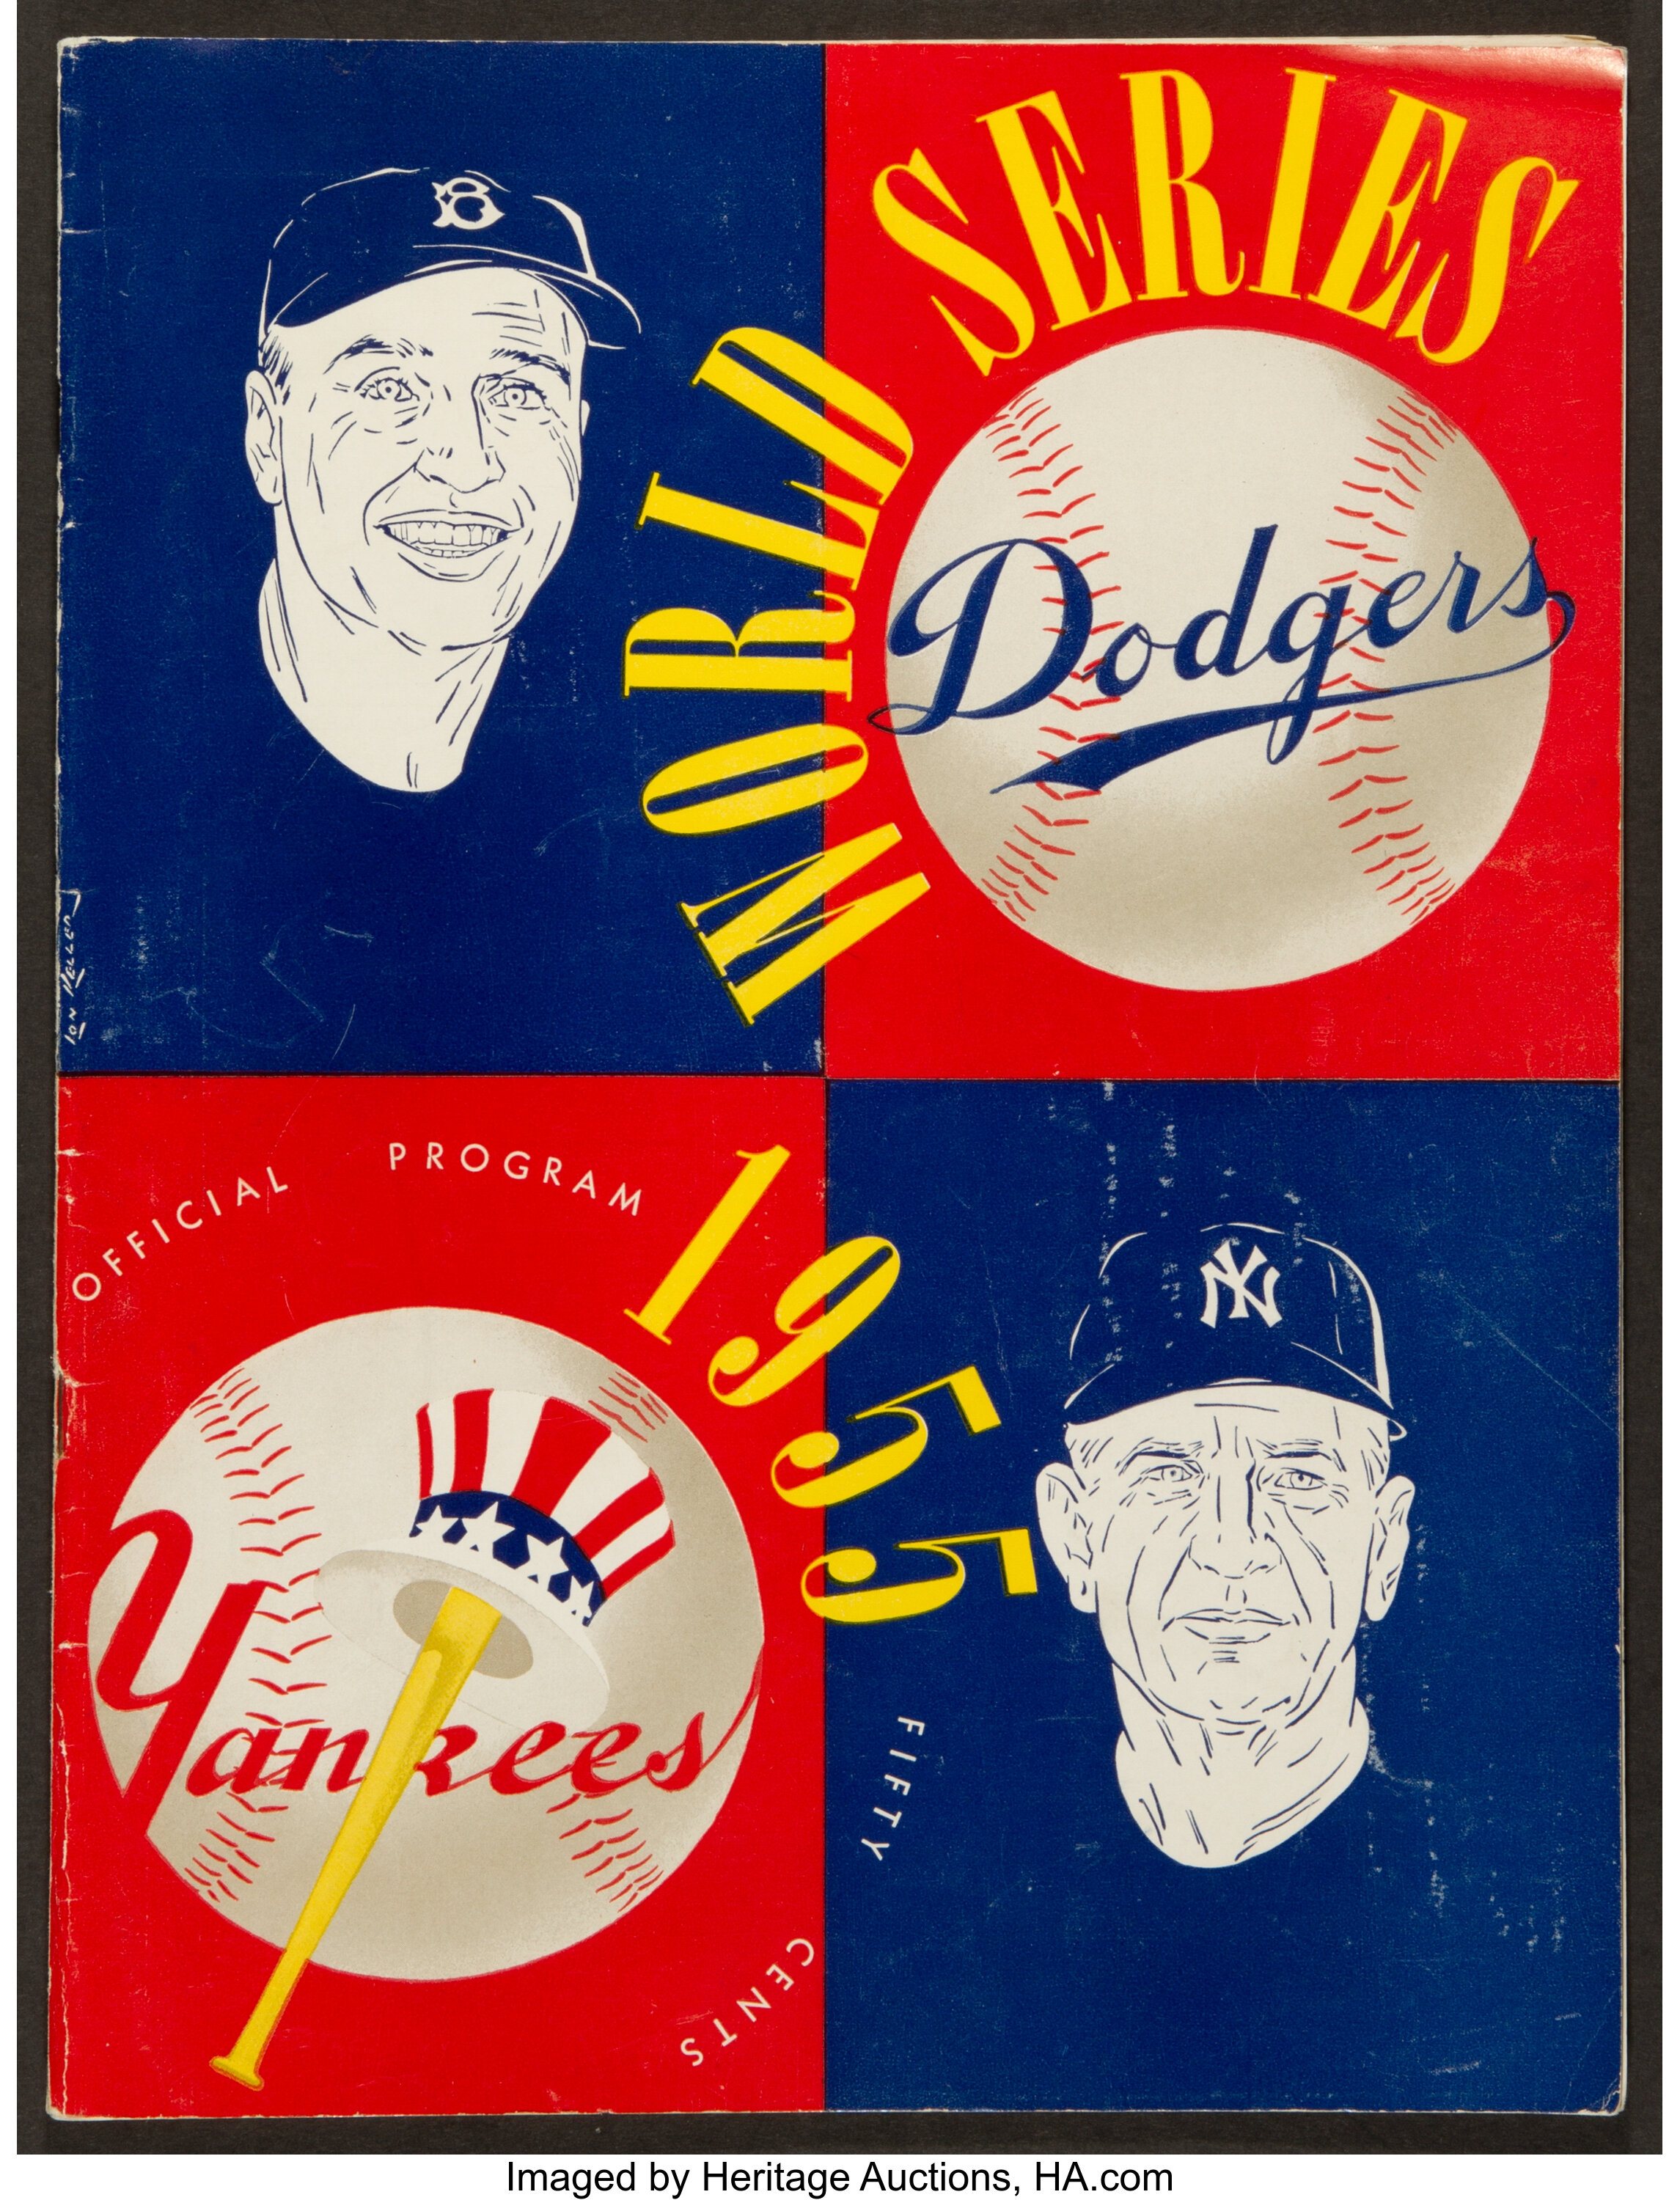 1955 World Series: Dodgers beat Yankees in seven - Sports